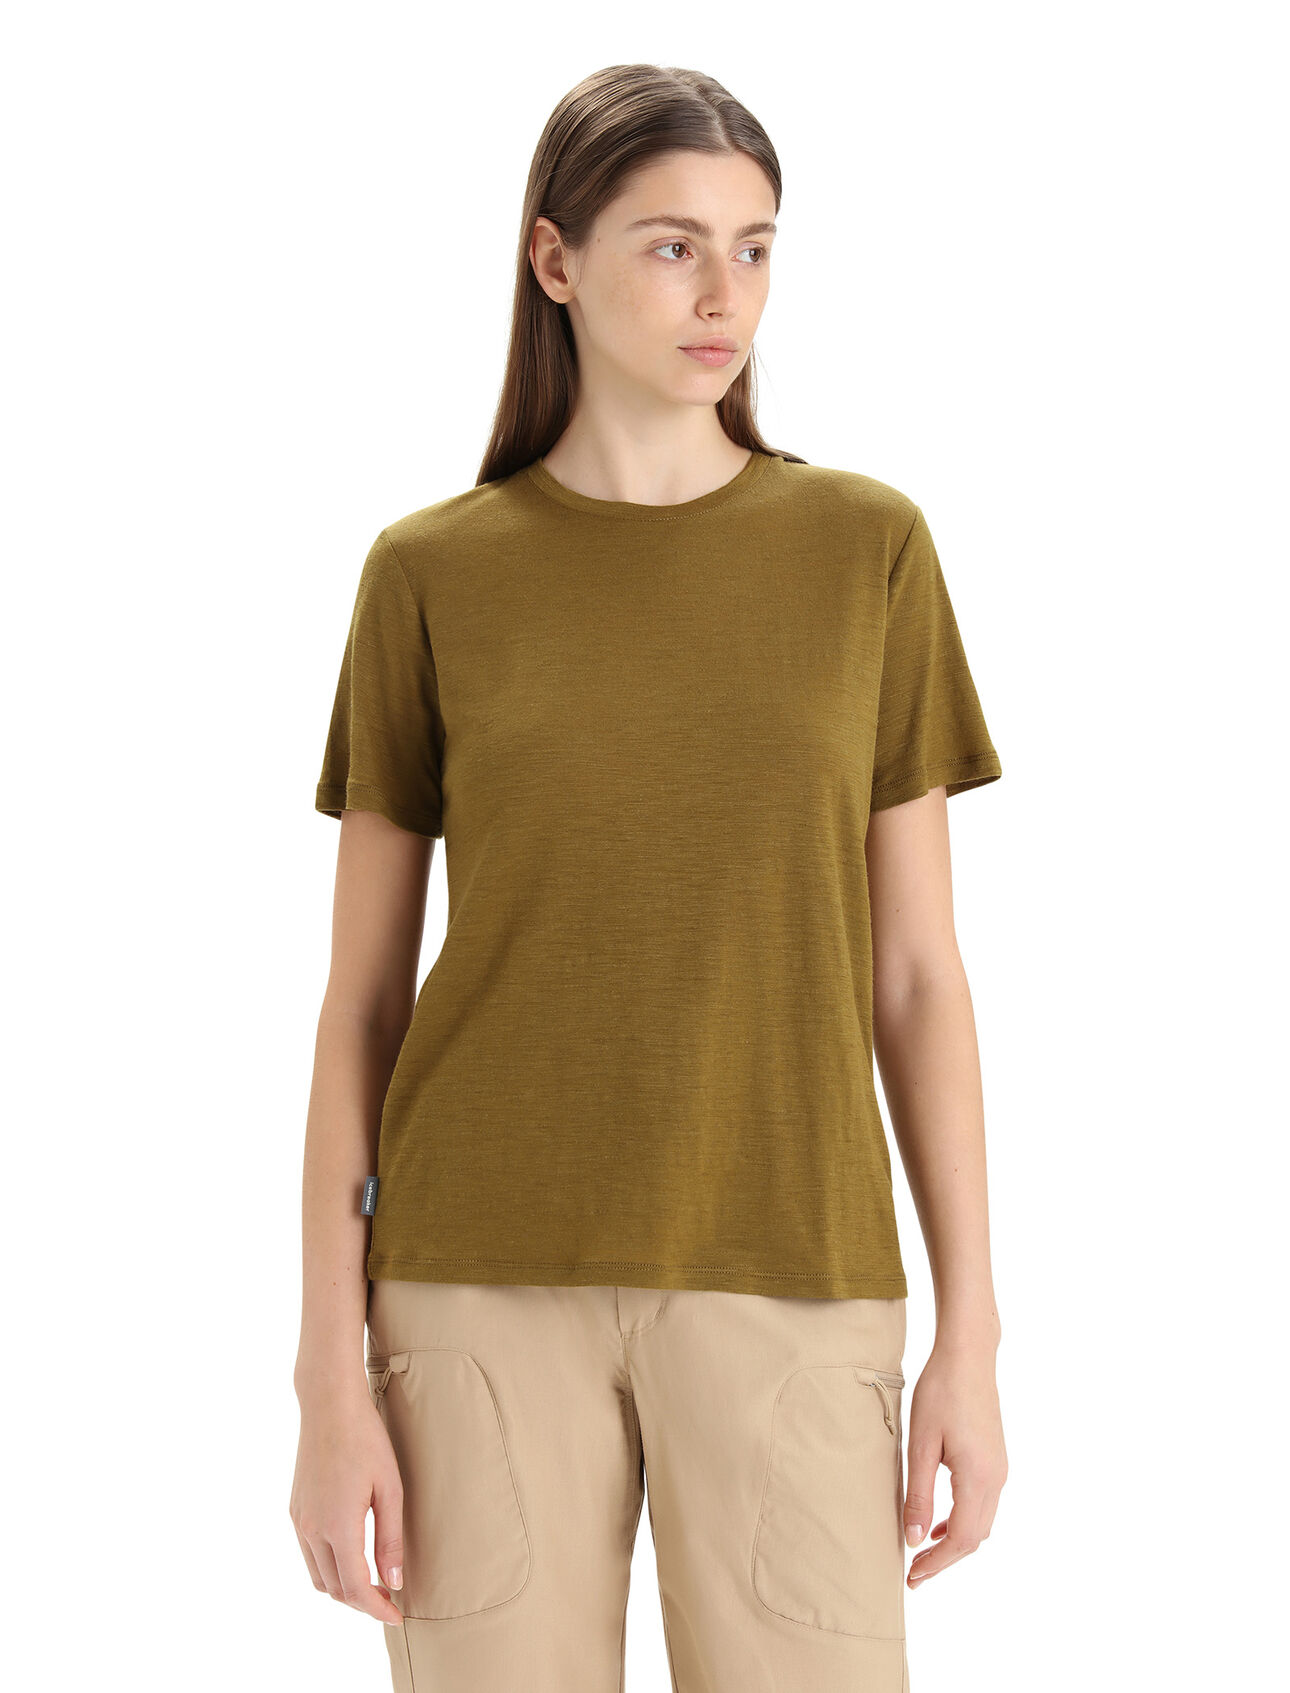 Womens Merino Linen Short Sleeve T-Shirt A lightweight, go-anywhere tee made with a soft blend of merino wool and linen, the Merino Linen Short Sleeve Tee is a staple for everyday comfort and style.